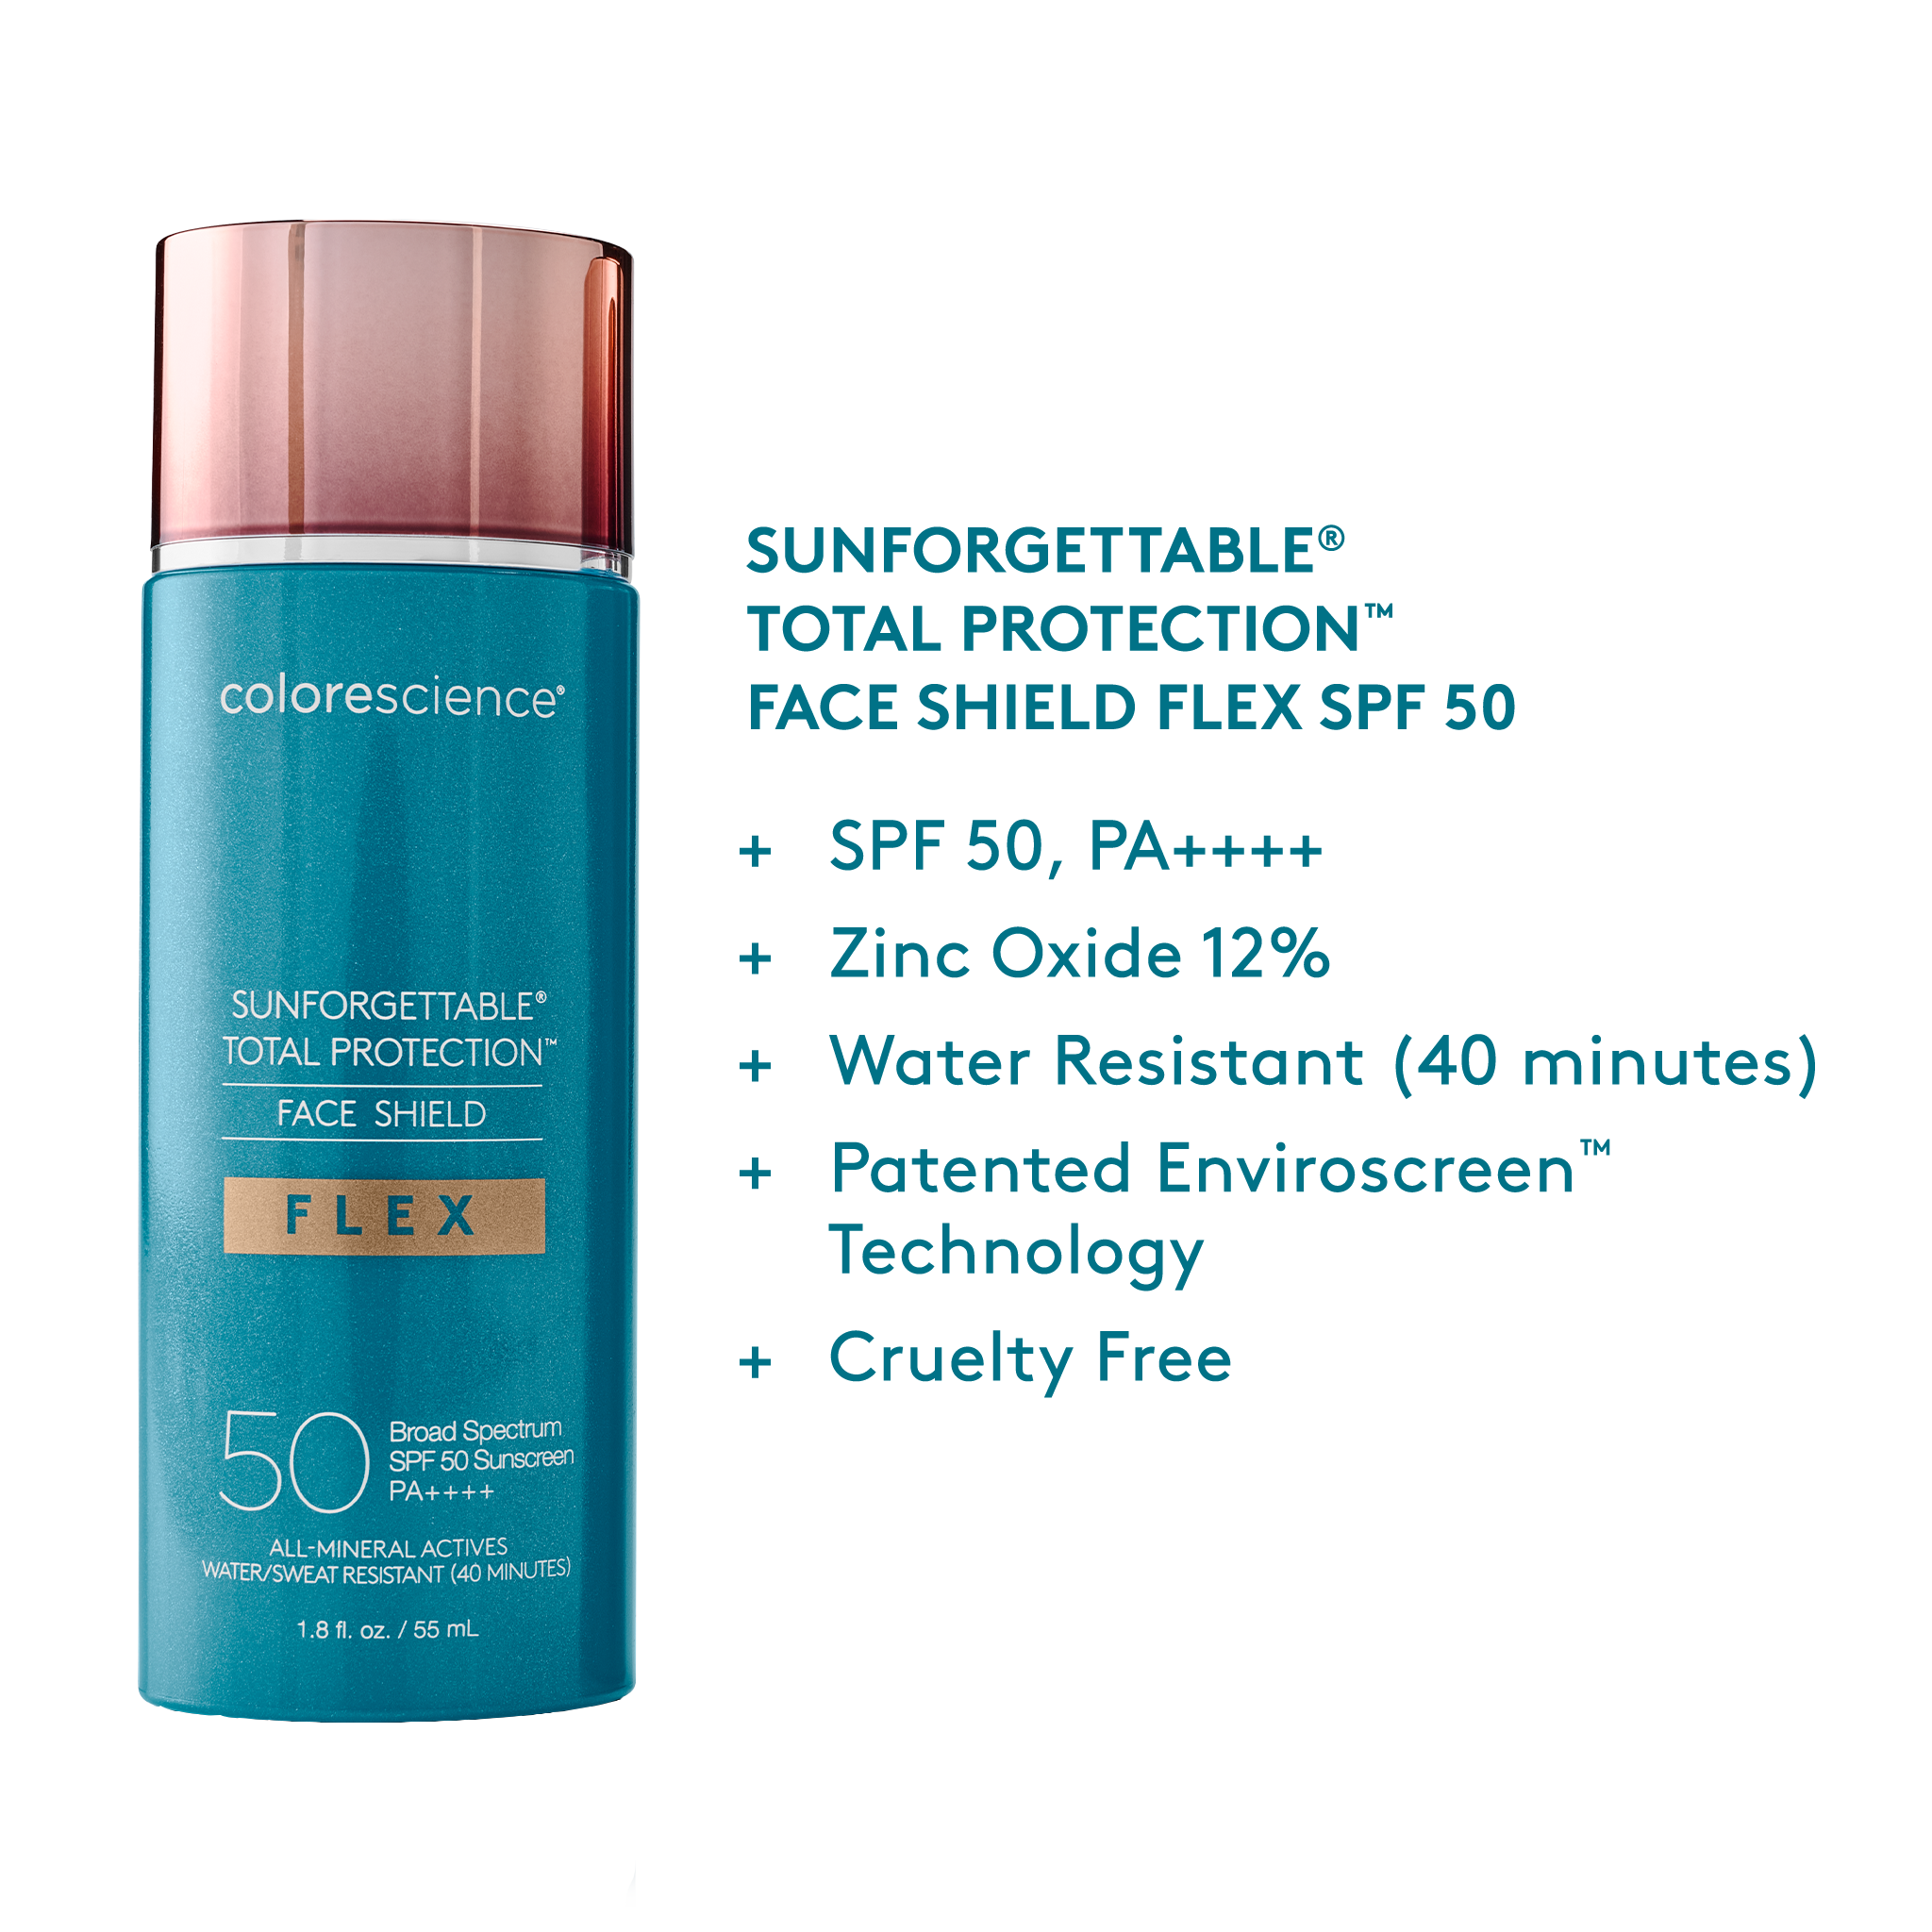 Sunforgettable® Total Protection™ Face Shield Flex SPF 50 information || all